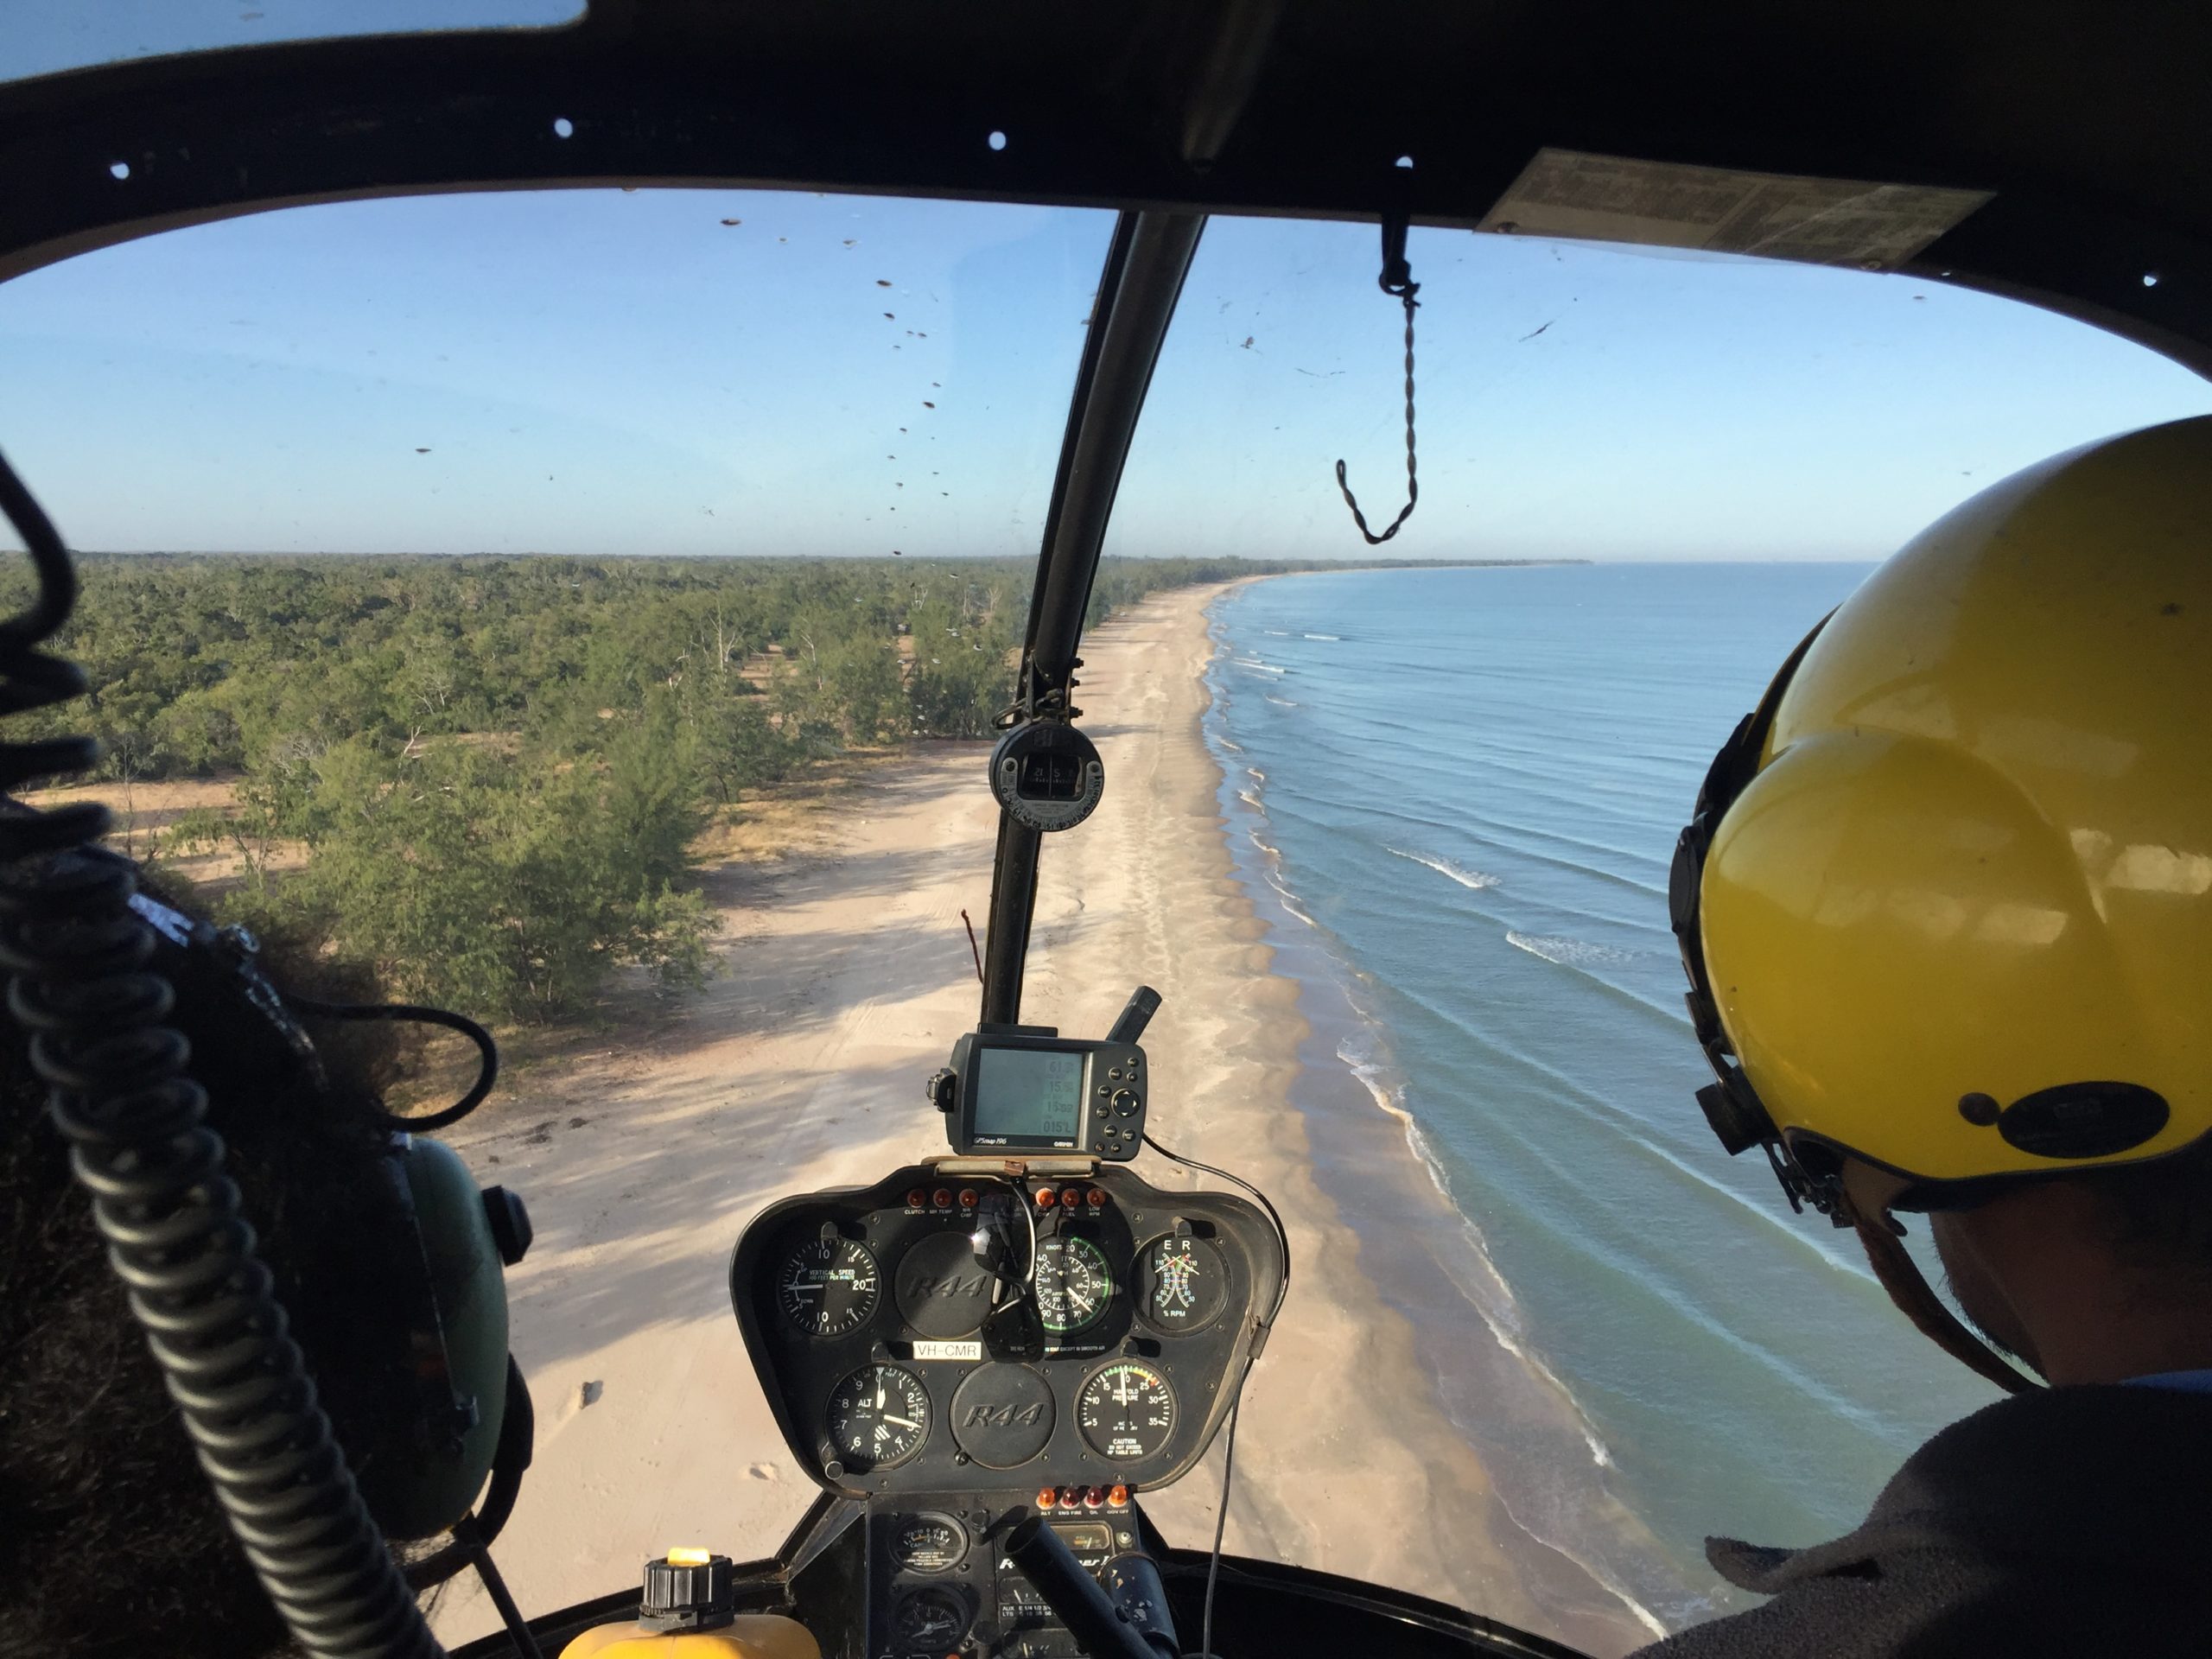 Photo of a view through the front window of a helicopter conducting a survey flight over a Cape York coastline.